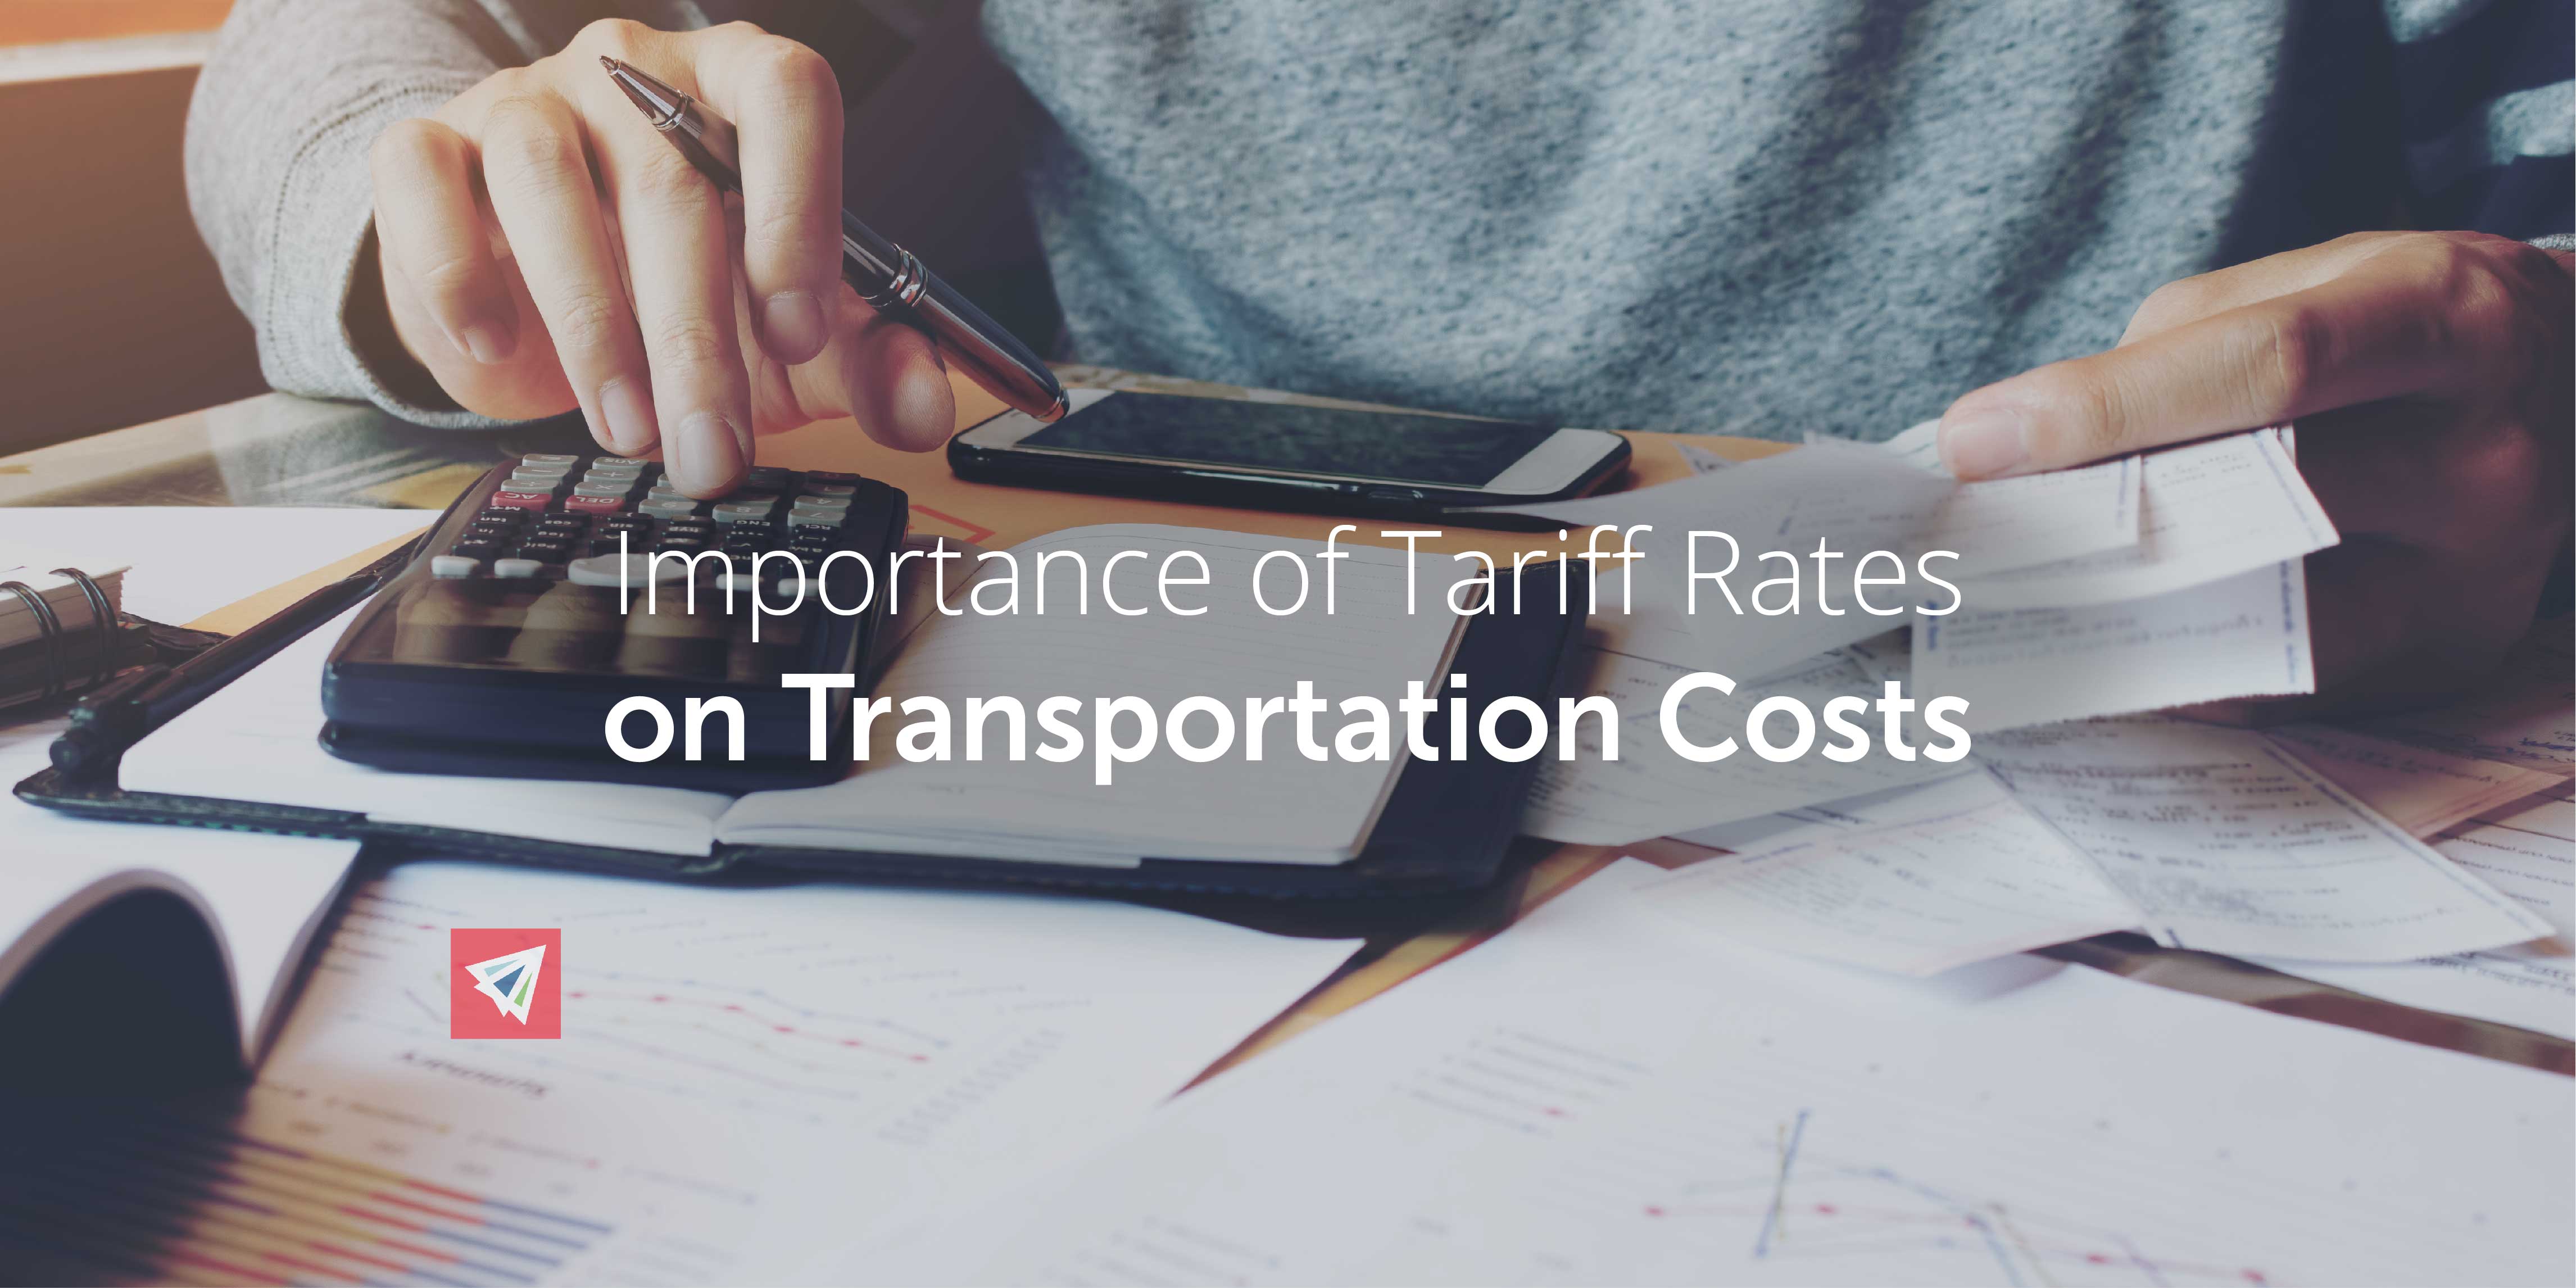 Importance of Tariff Rates on Transportation Costs